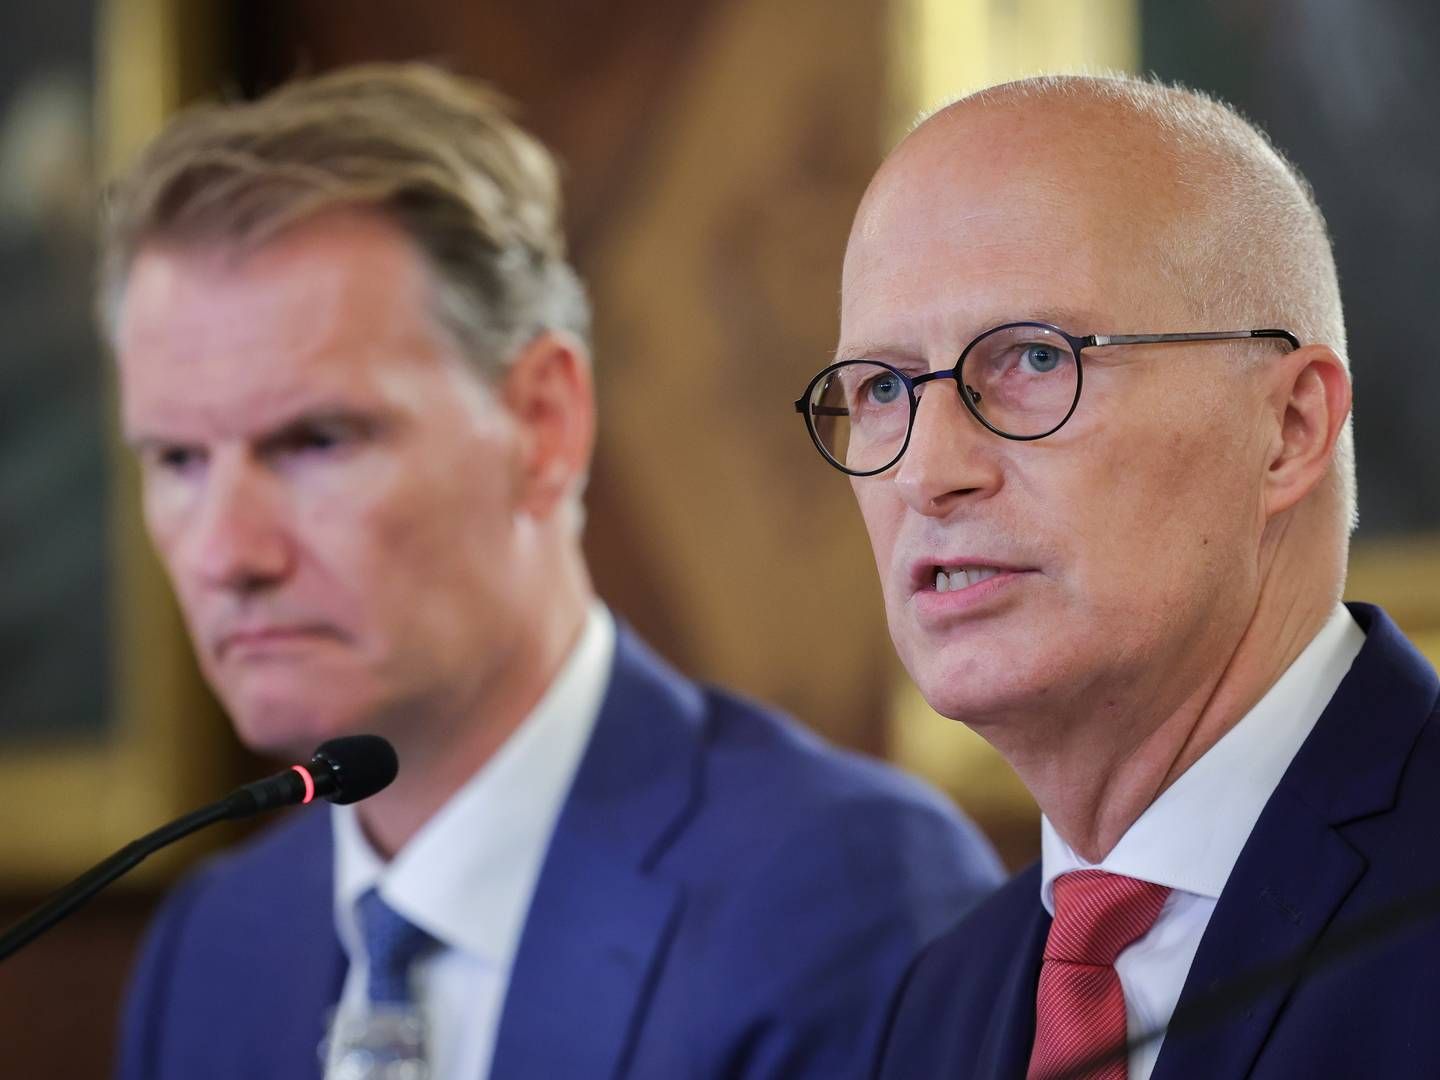 The agreement was presented at a press conference in September, where MSC's CEO, Søren Toft, participated together with the mayor of Hamburg, Peter Tschentscher. | Photo: Christian Charisius/AP/Ritzau Scanpix